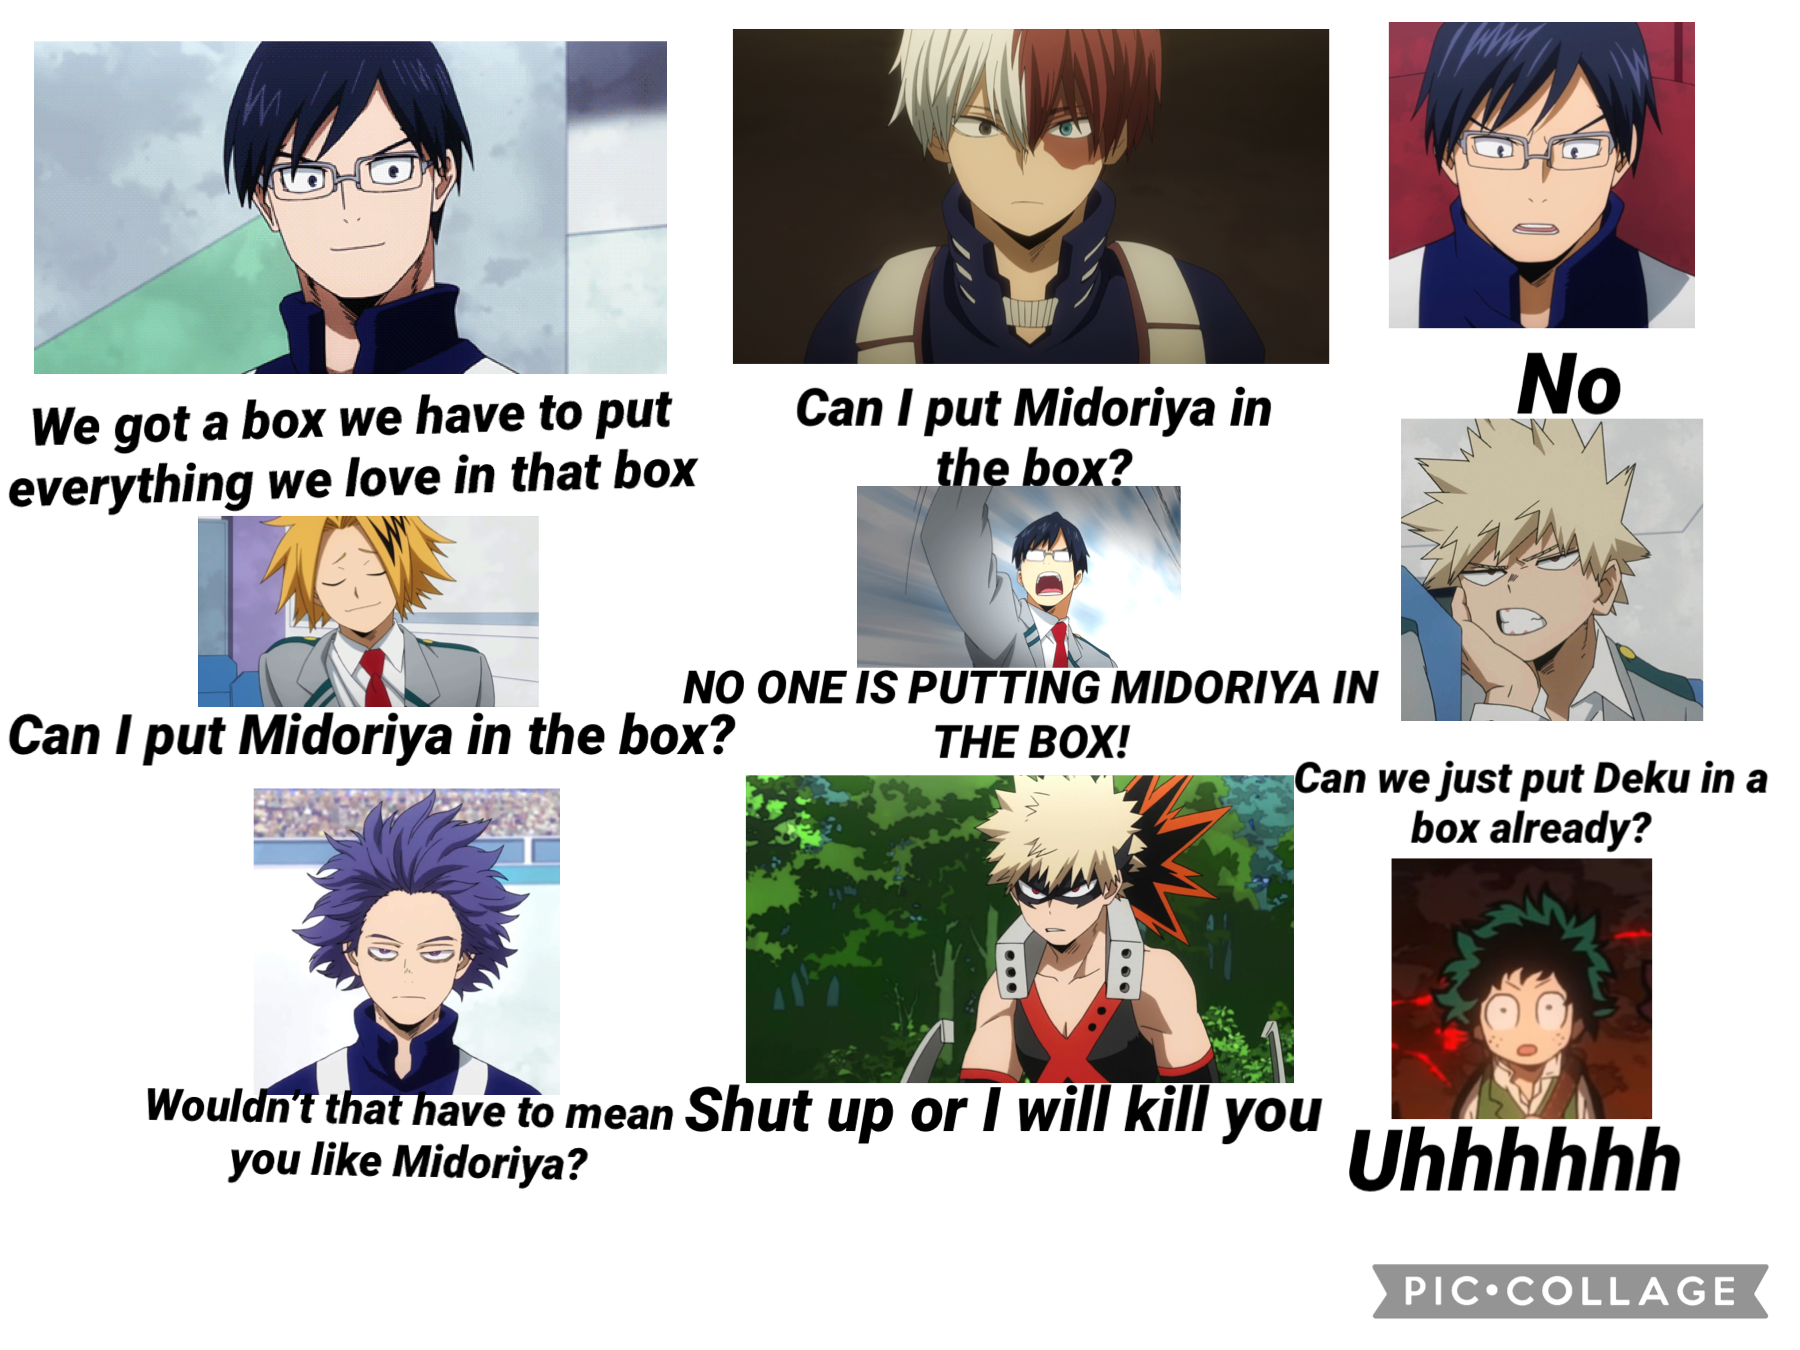 This took so long to make XD this is the best MHA thing I ever posted 